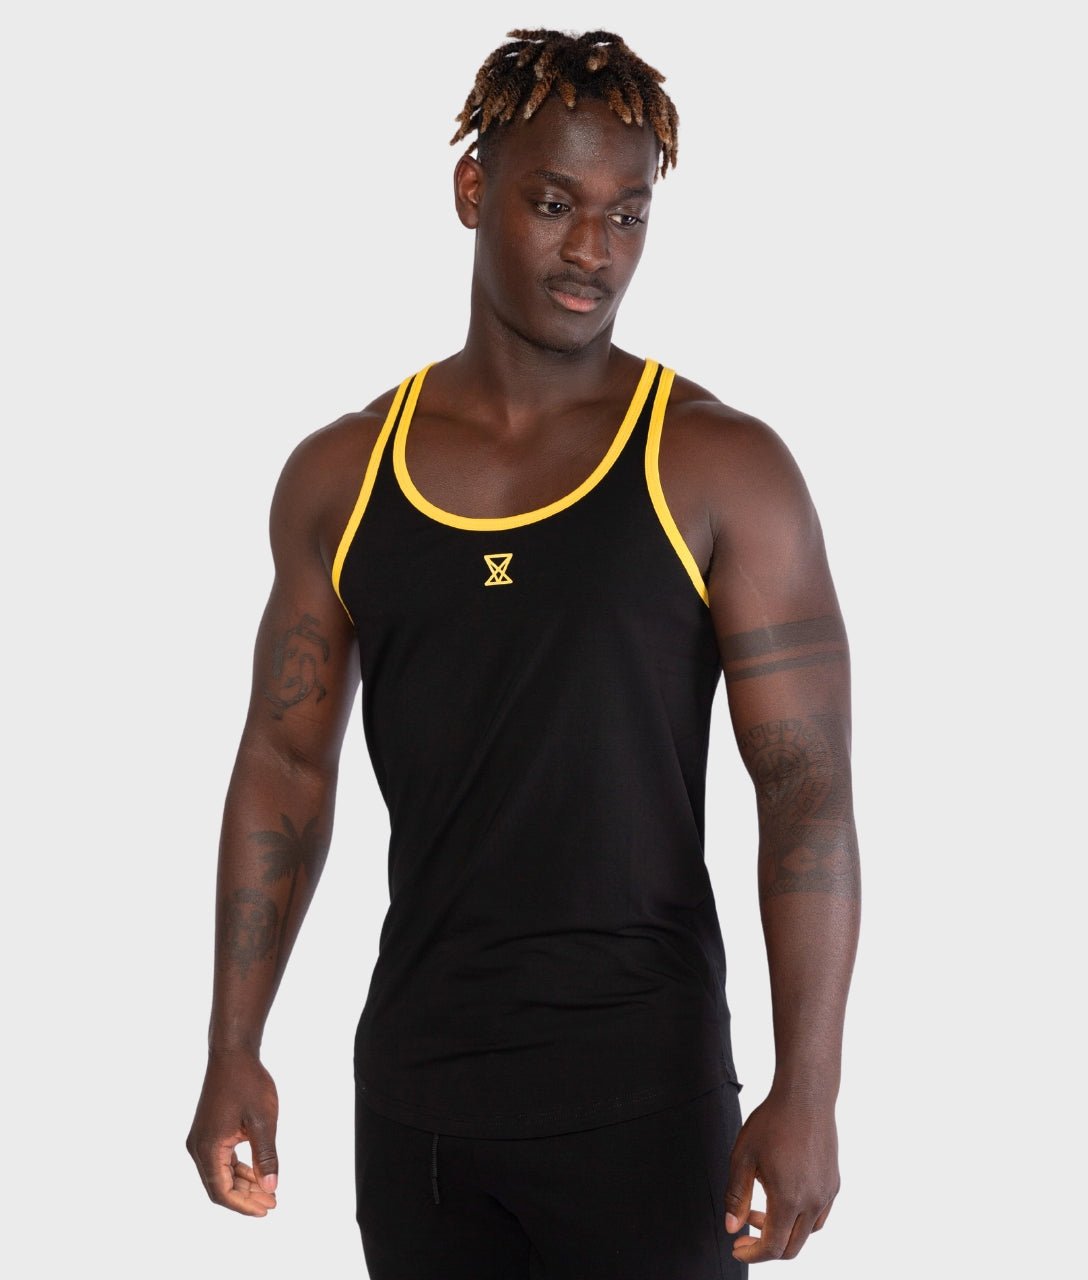 Men's Gym Vests and Tanks - Gym & Fitness Clothing - VXS Gym Wear